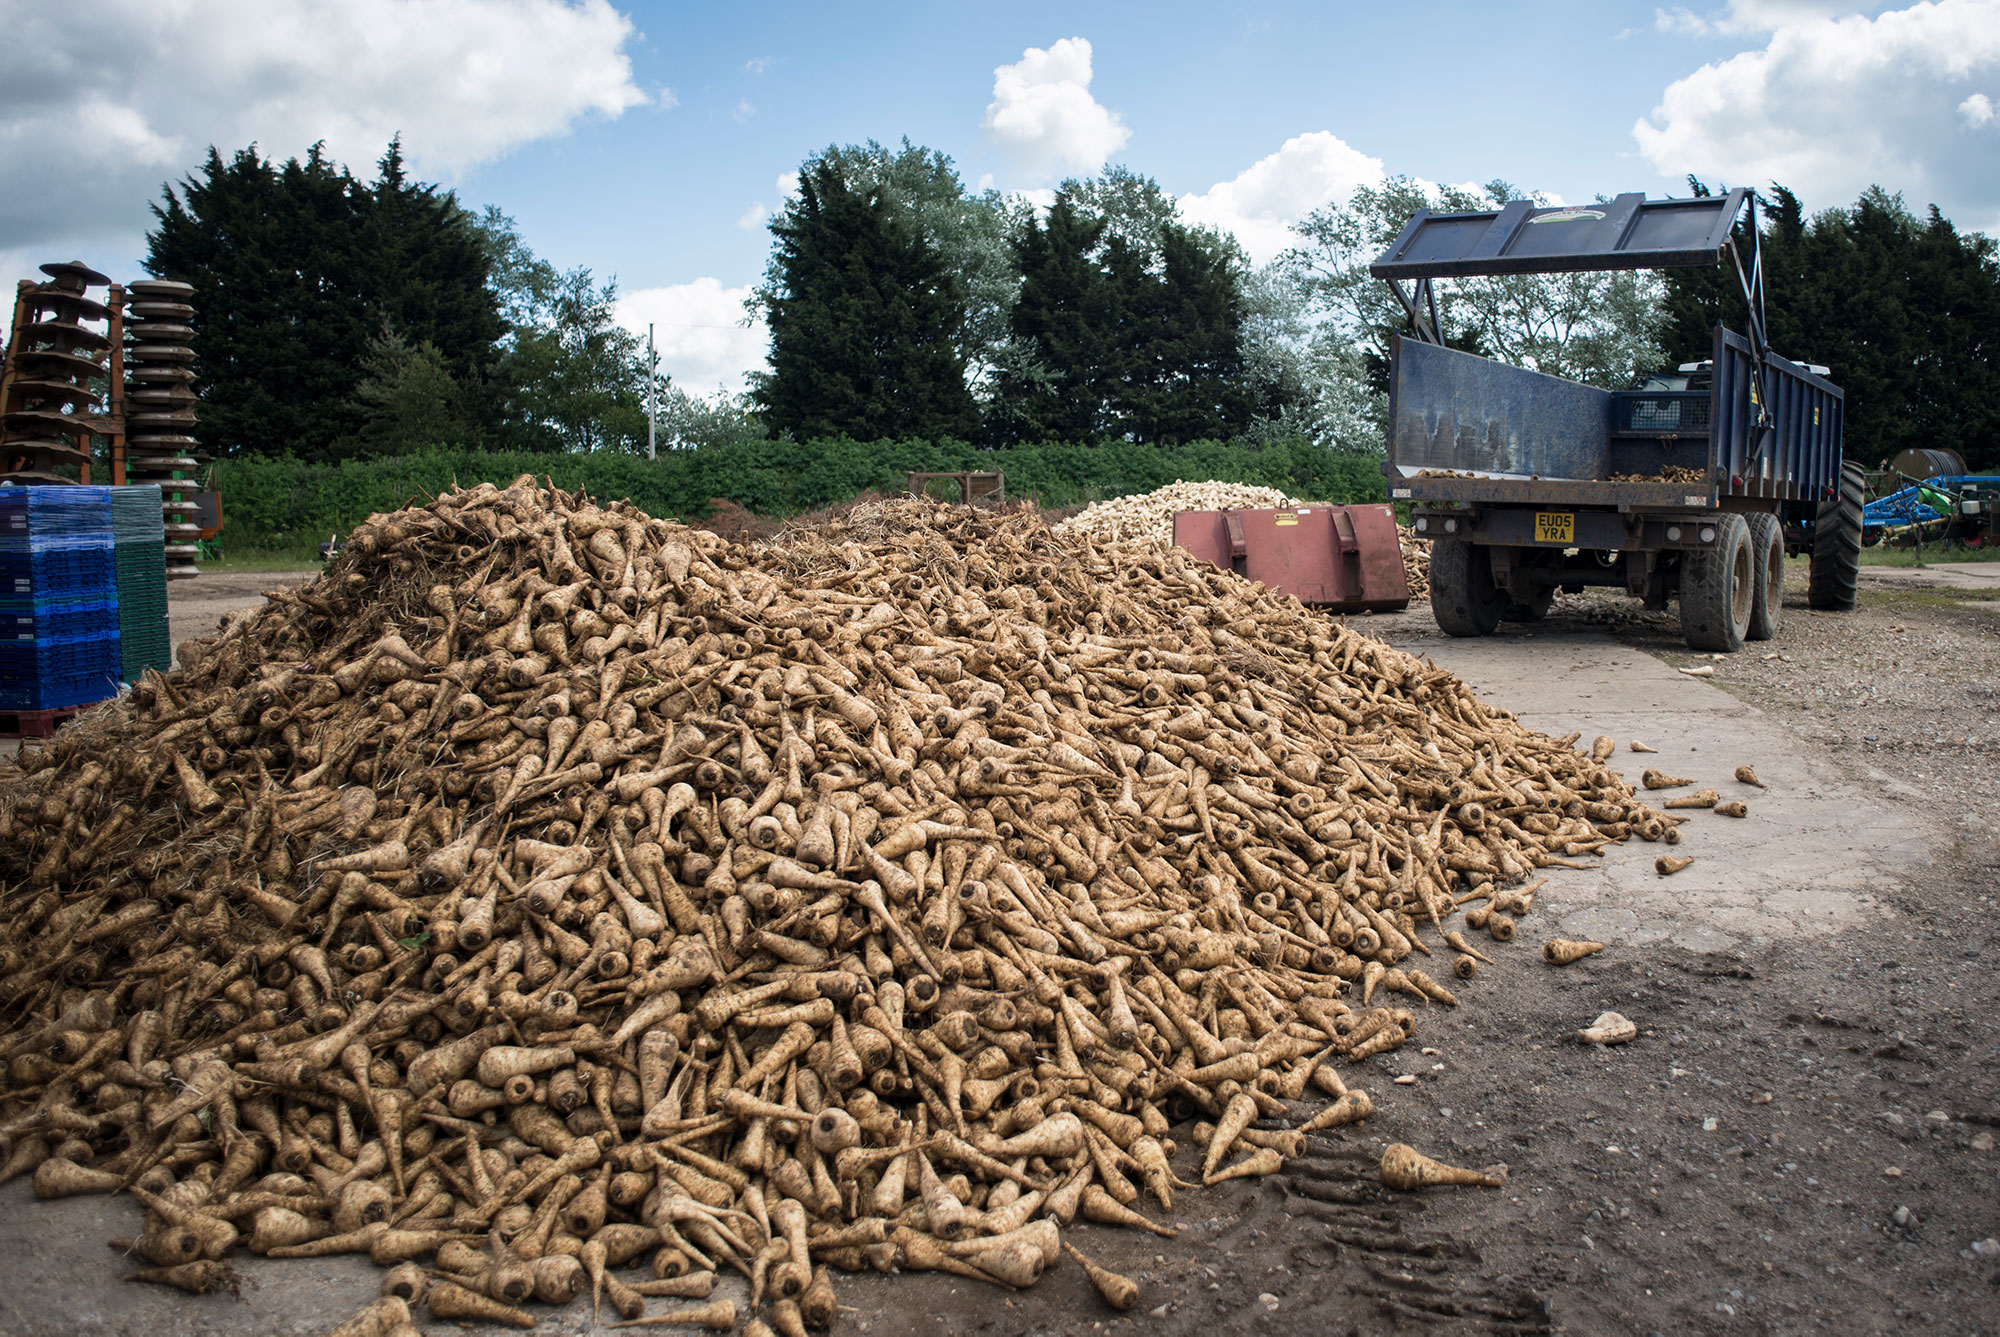 A 2-tonne pile of parsnips that were going to be left to go to waste